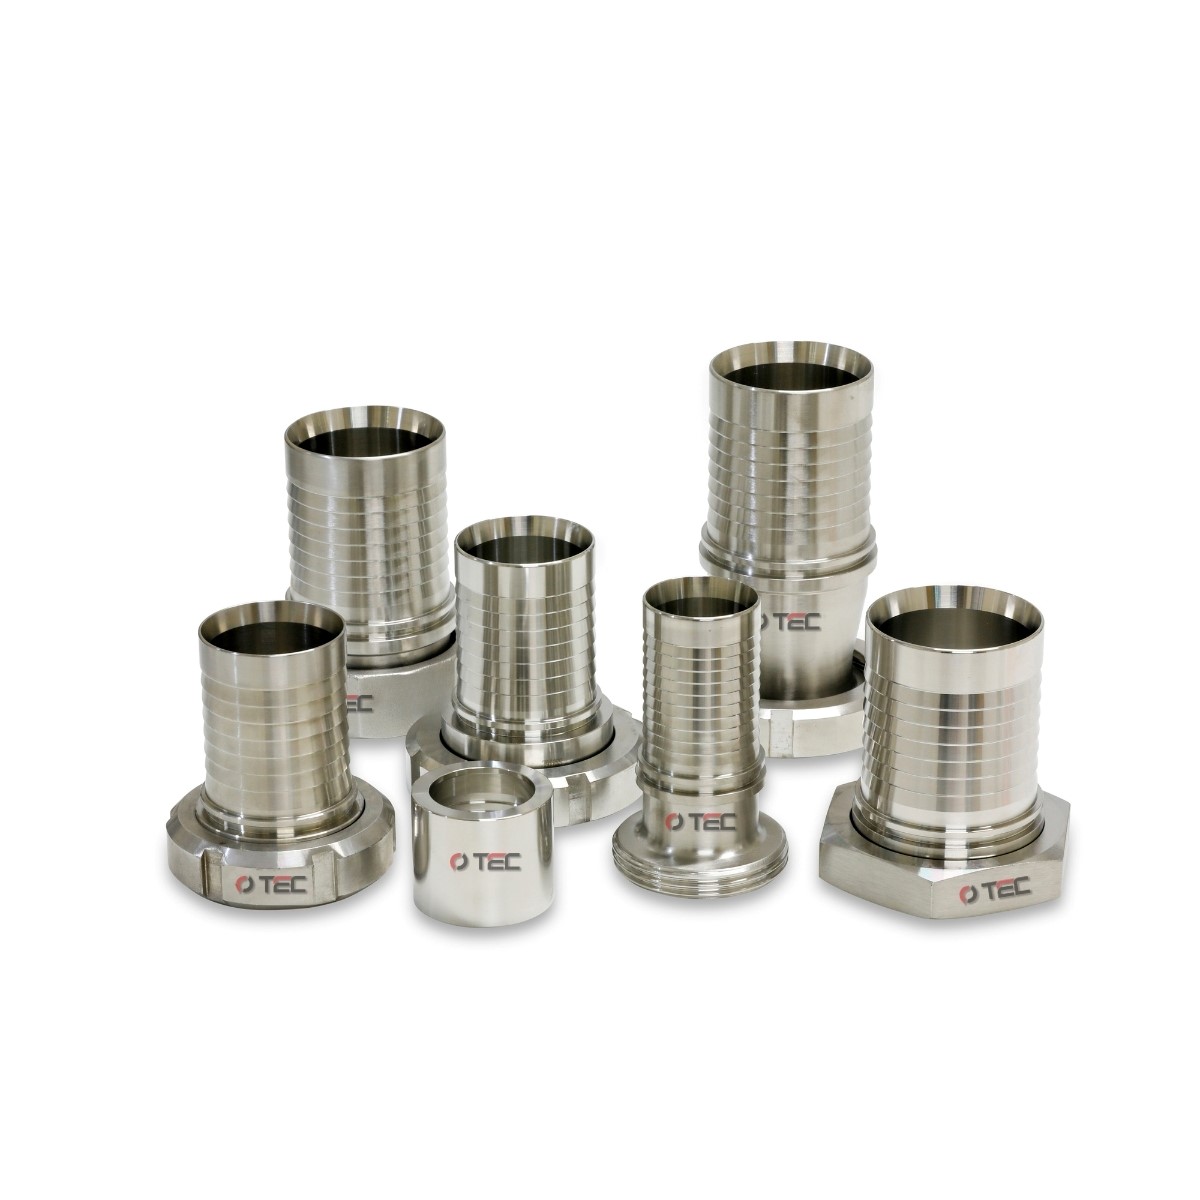 A group of metal fittings.